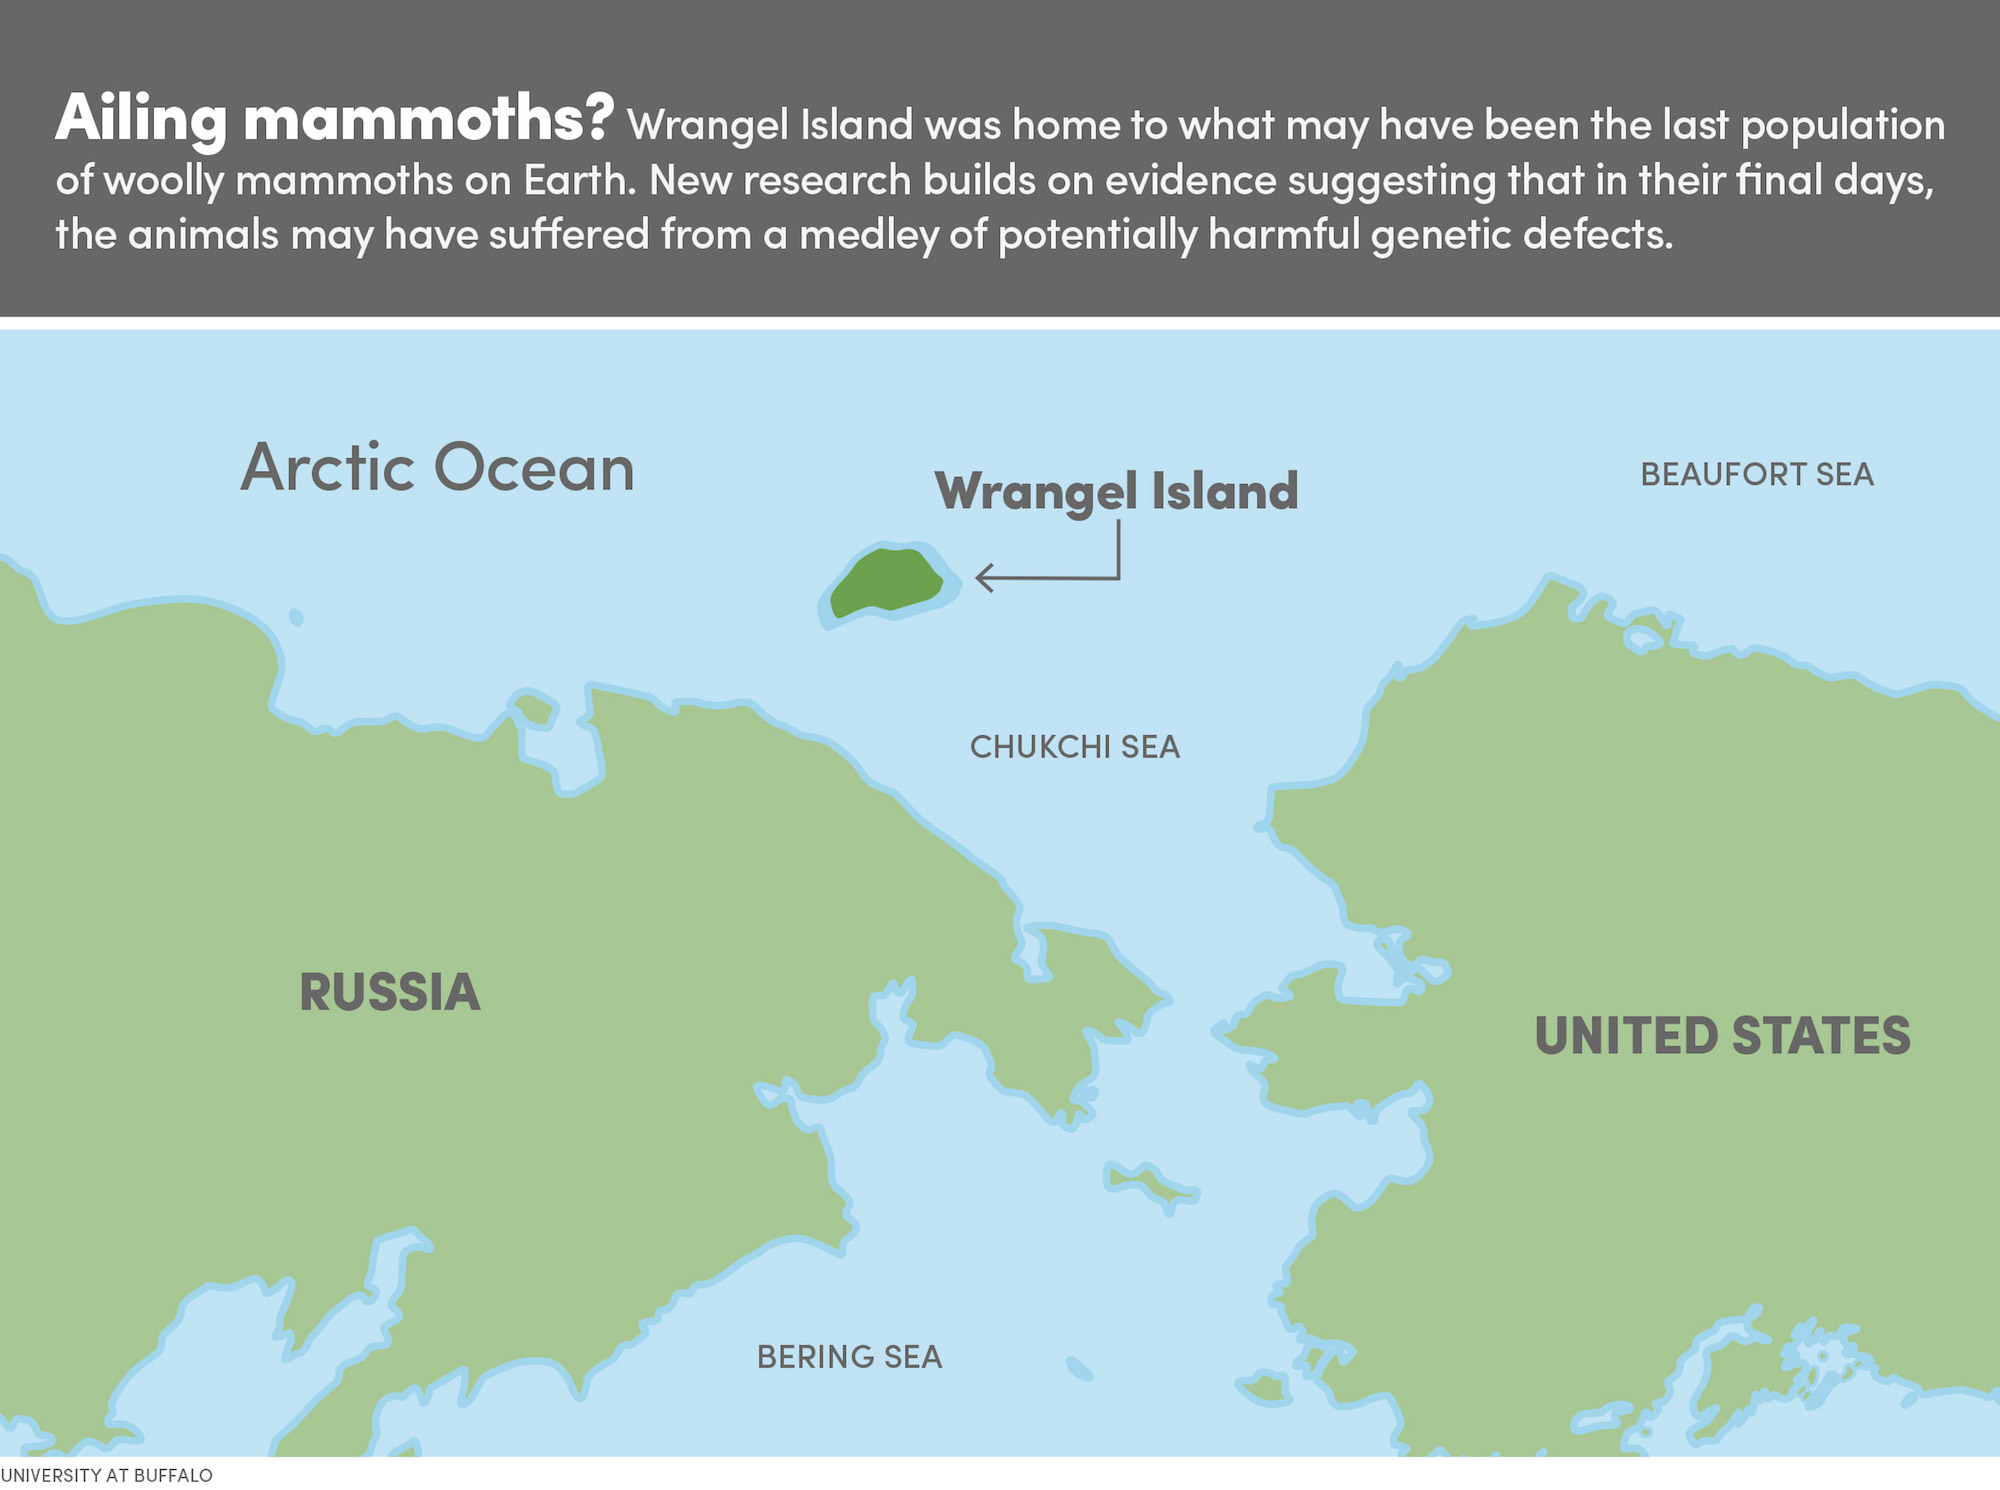  A map shows the location of Wrangel Island in the Arctic Ocean, north of Russia and east of the United States. The island is highlighted in green, and a green arrow points to it. The text on the map reads "Wrangel Island".